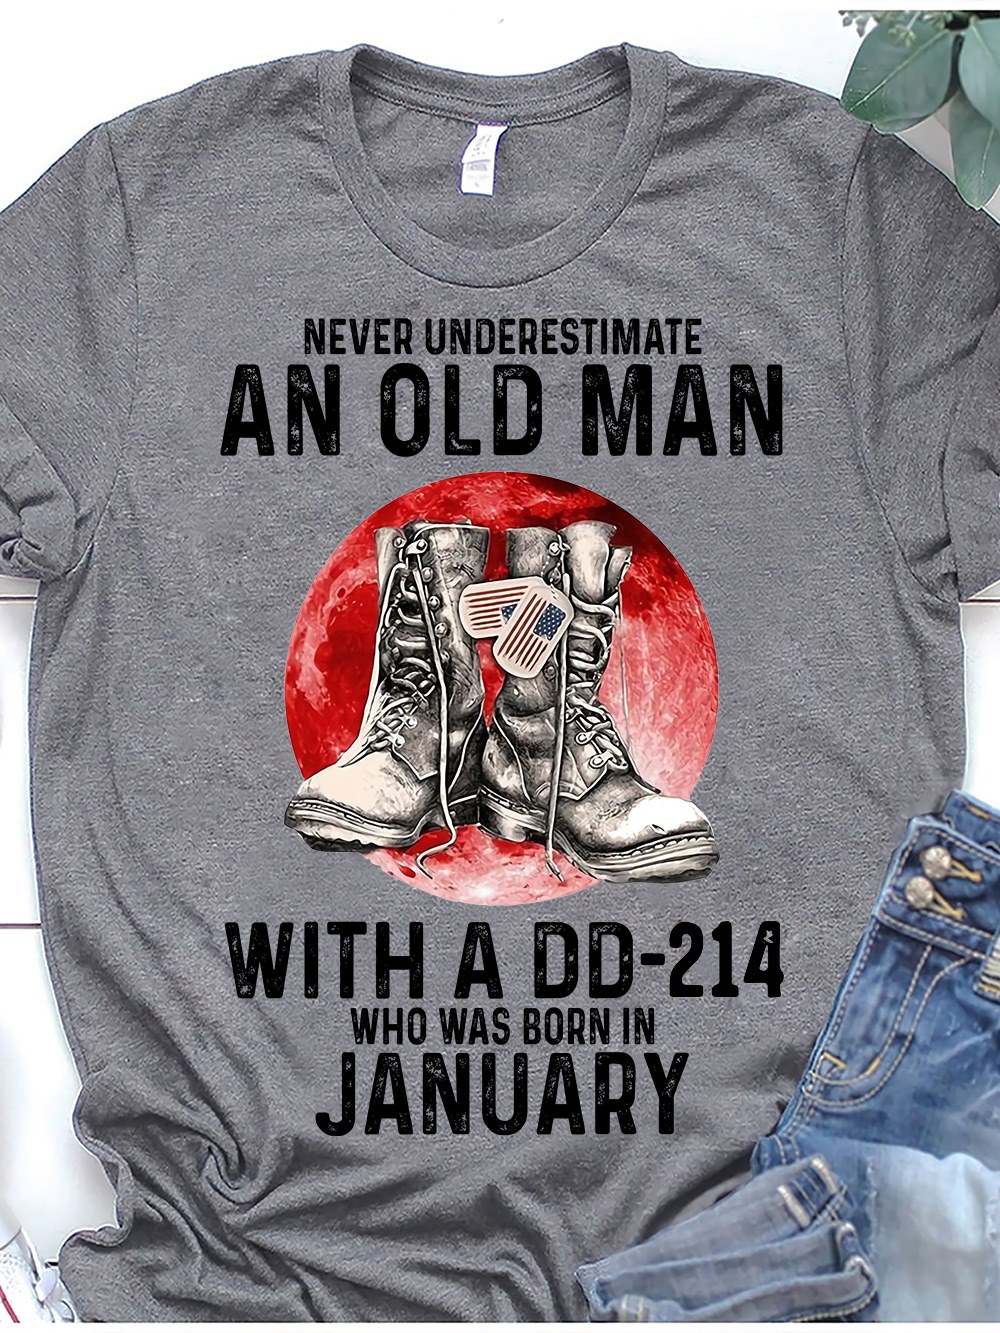 Never underestimate an old man with a DD-214